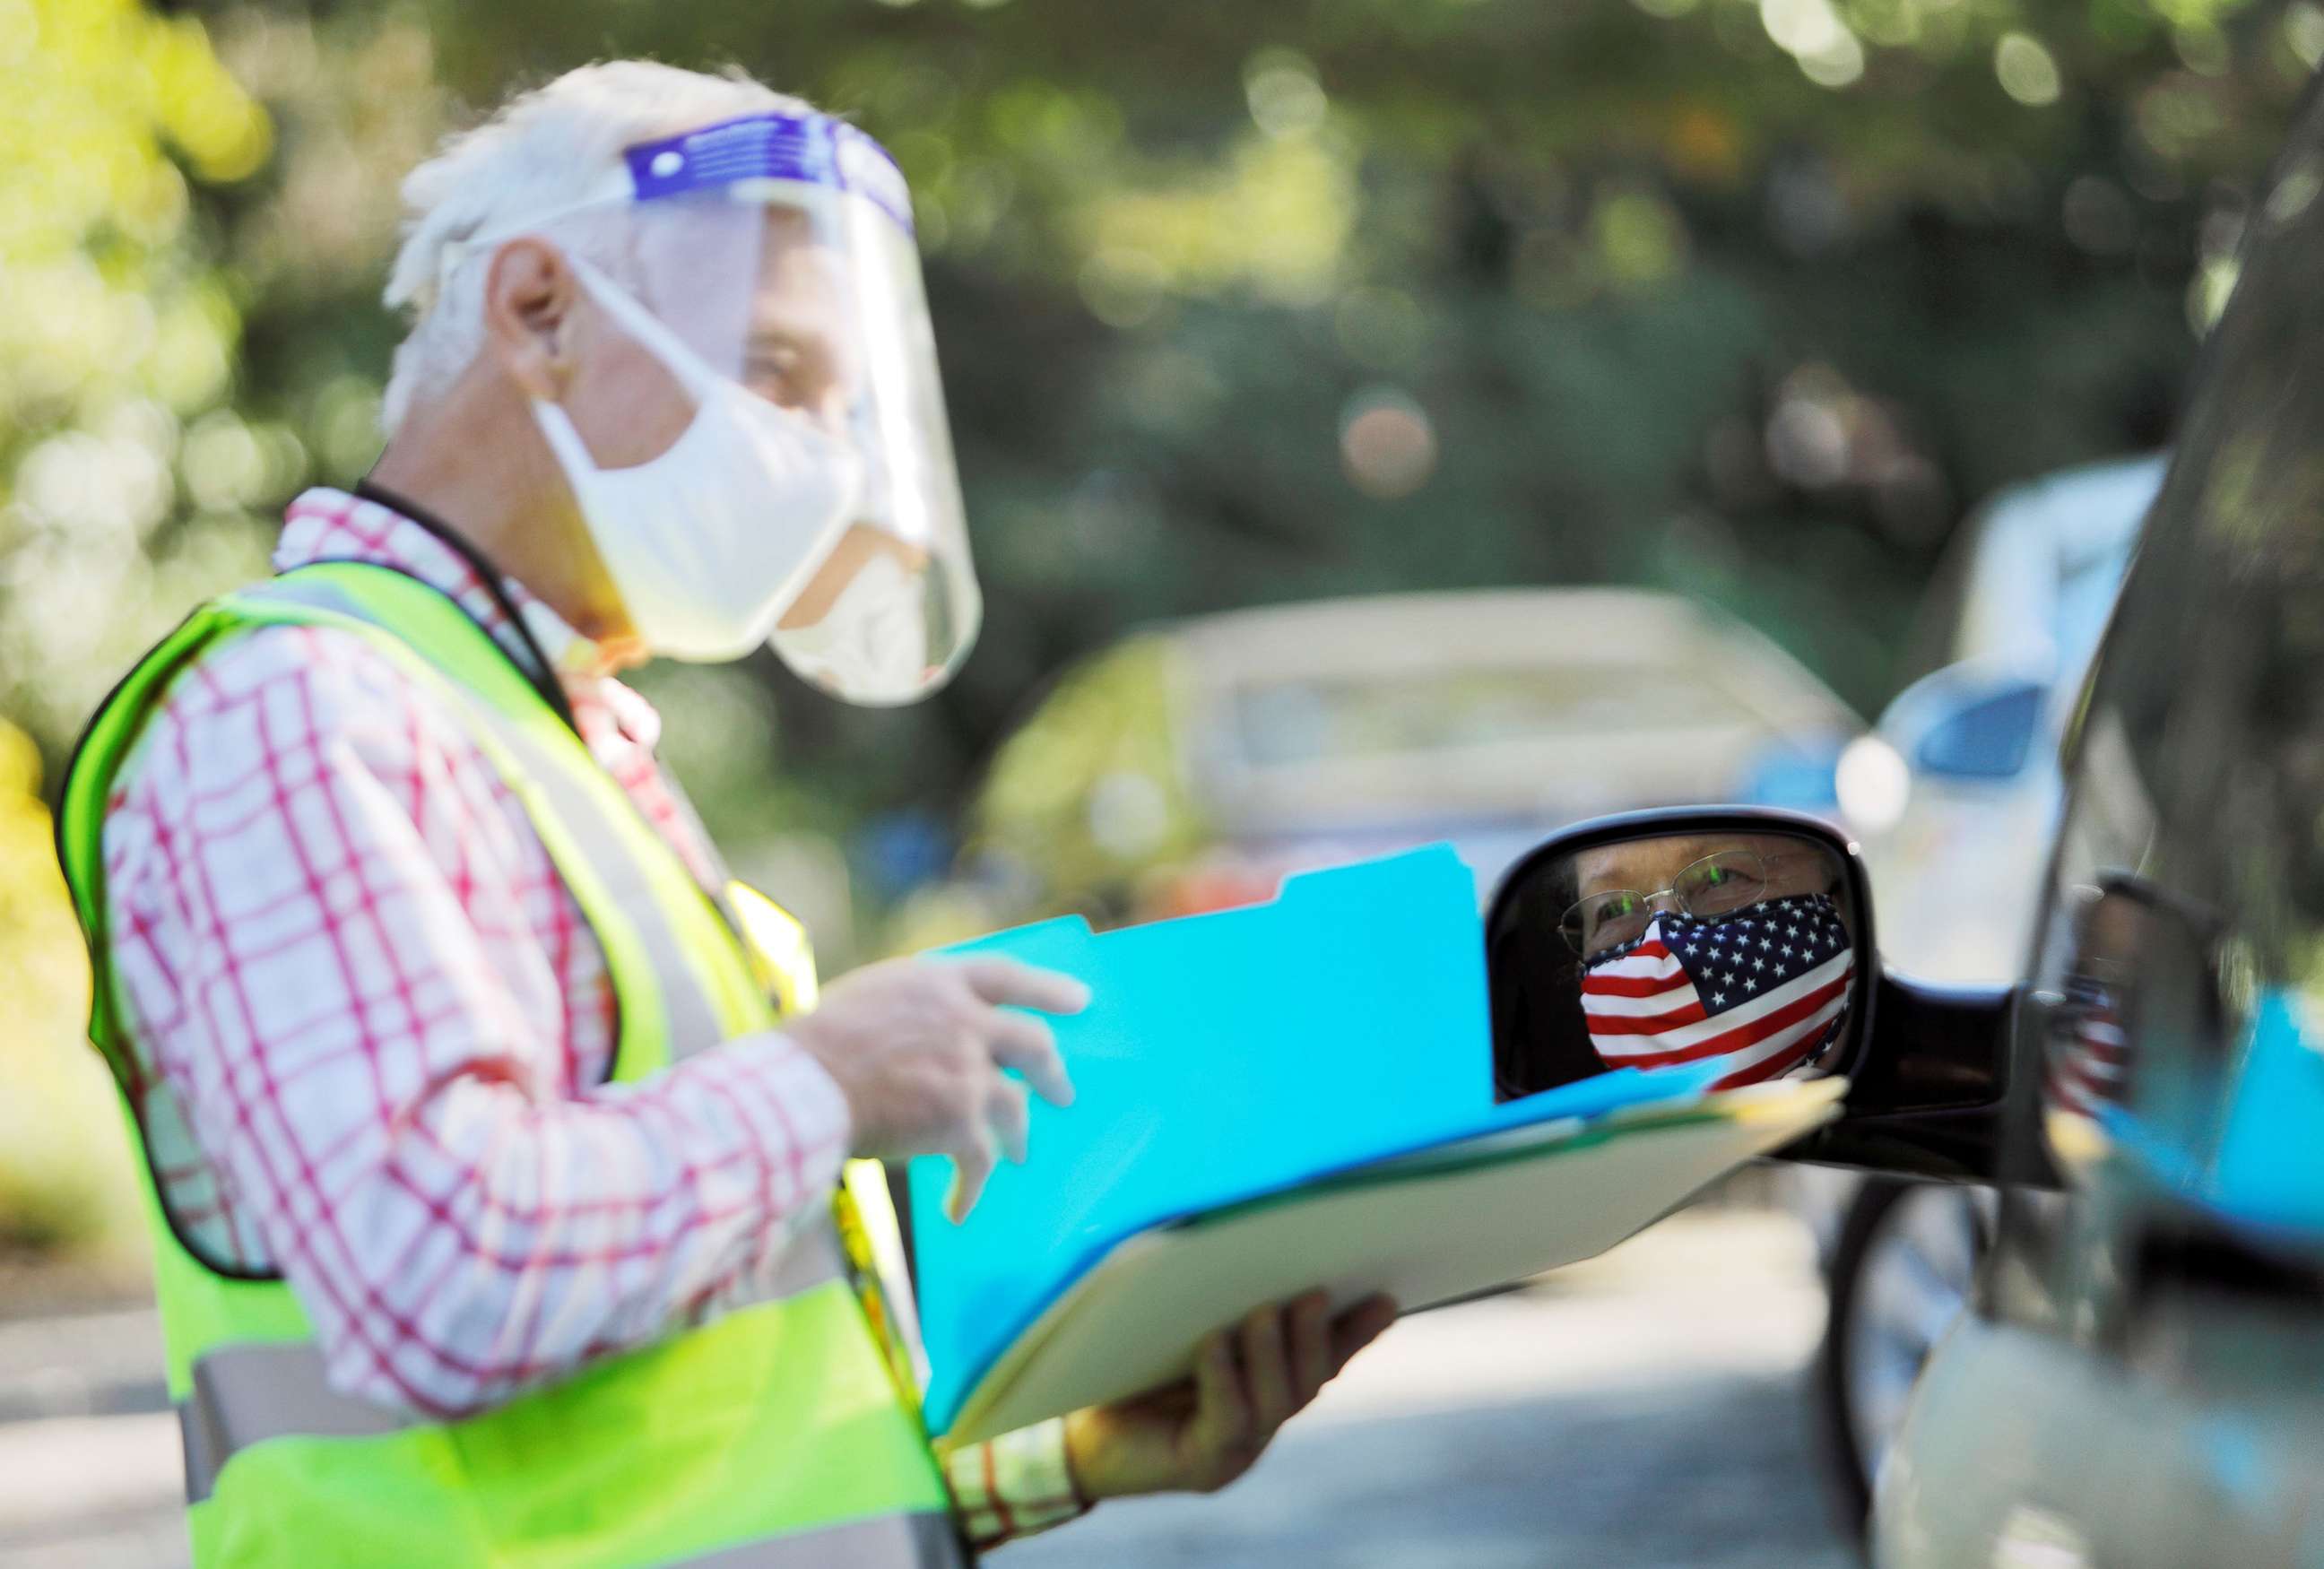 PHOTO: An election worker wearing a mask and face shield for COVID-19 assists a voter casting her ballot from her car on the first day of the state's in-person early voting for the national elections in Durham, N.C., OCT. 15, 2020.